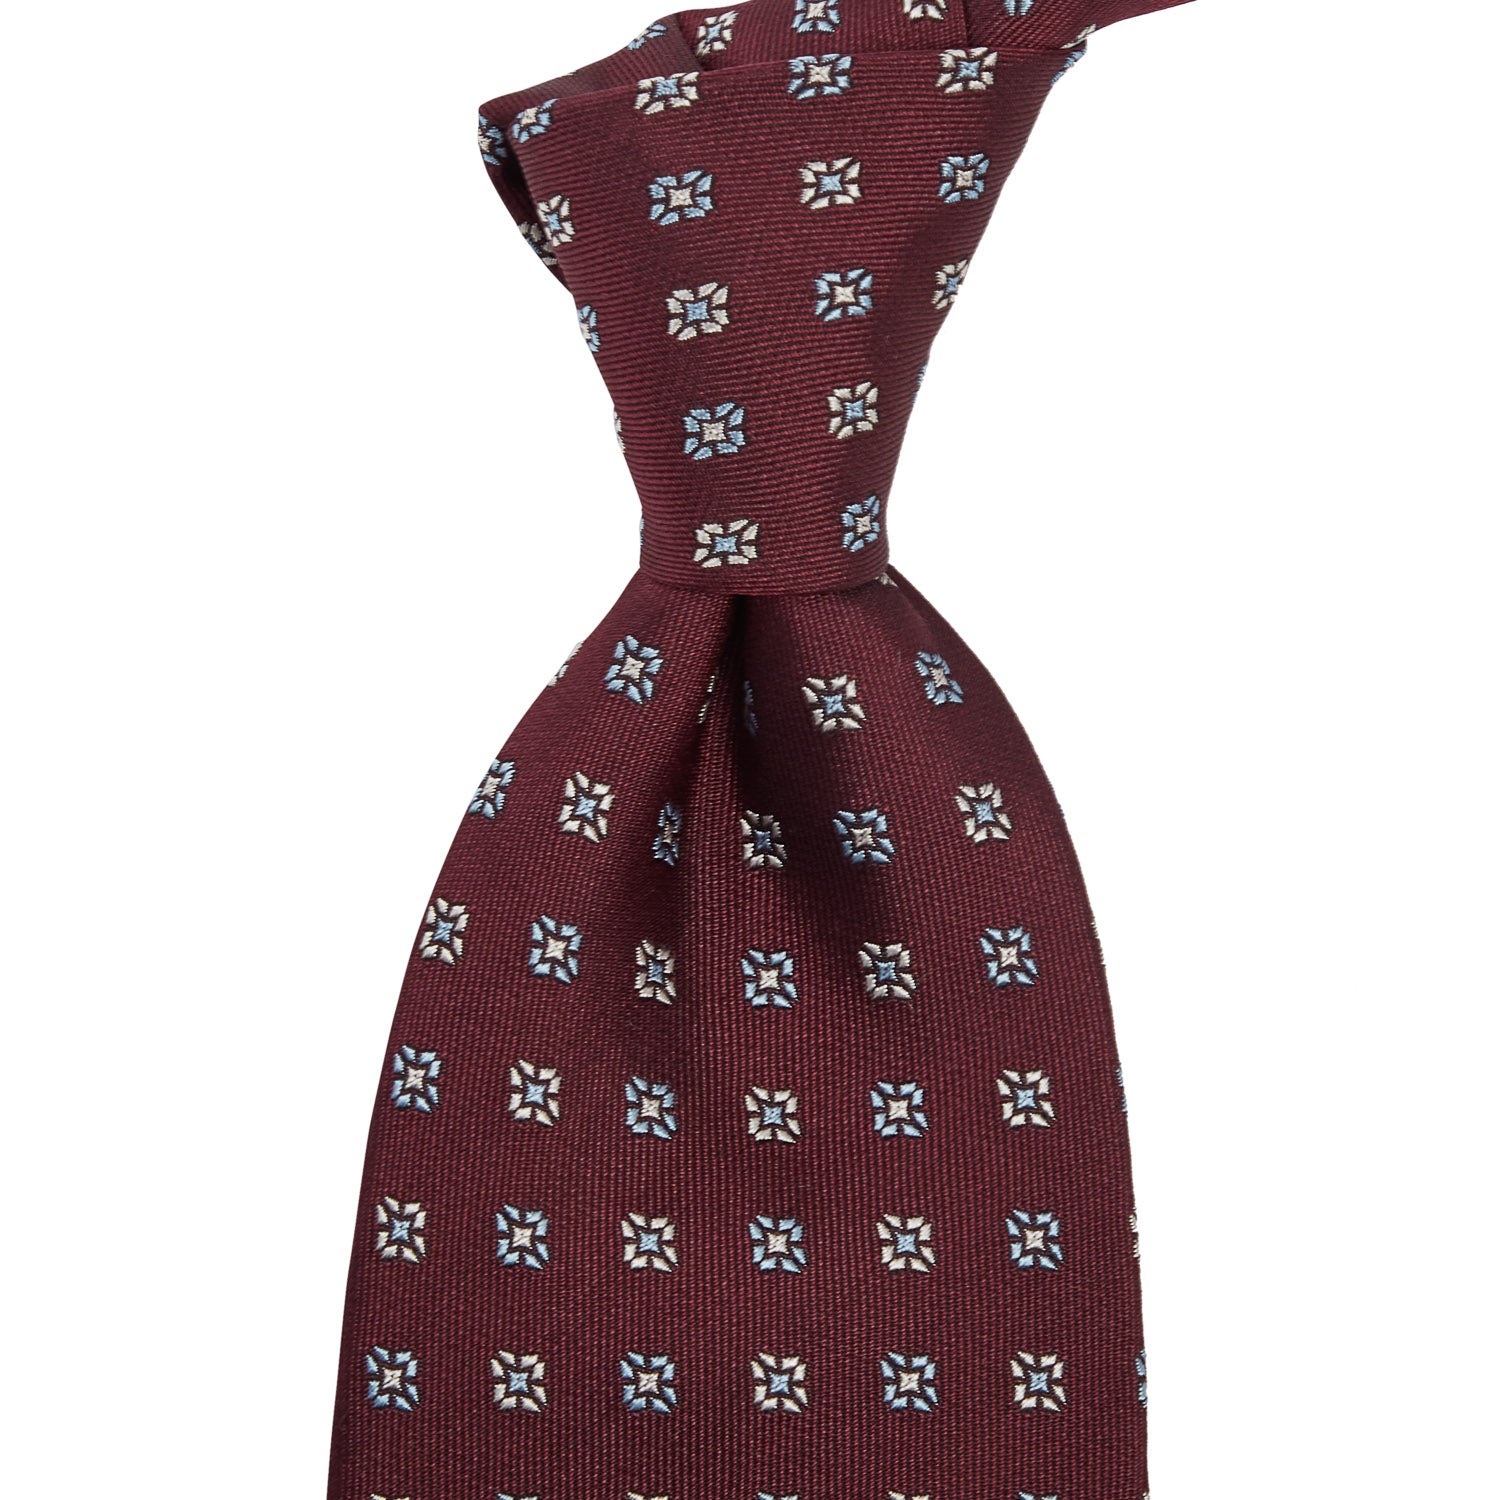 A Sovereign Grade Oxblood Square Floral Jacquard Tie by KirbyAllison.com with blue and white flowers on it.